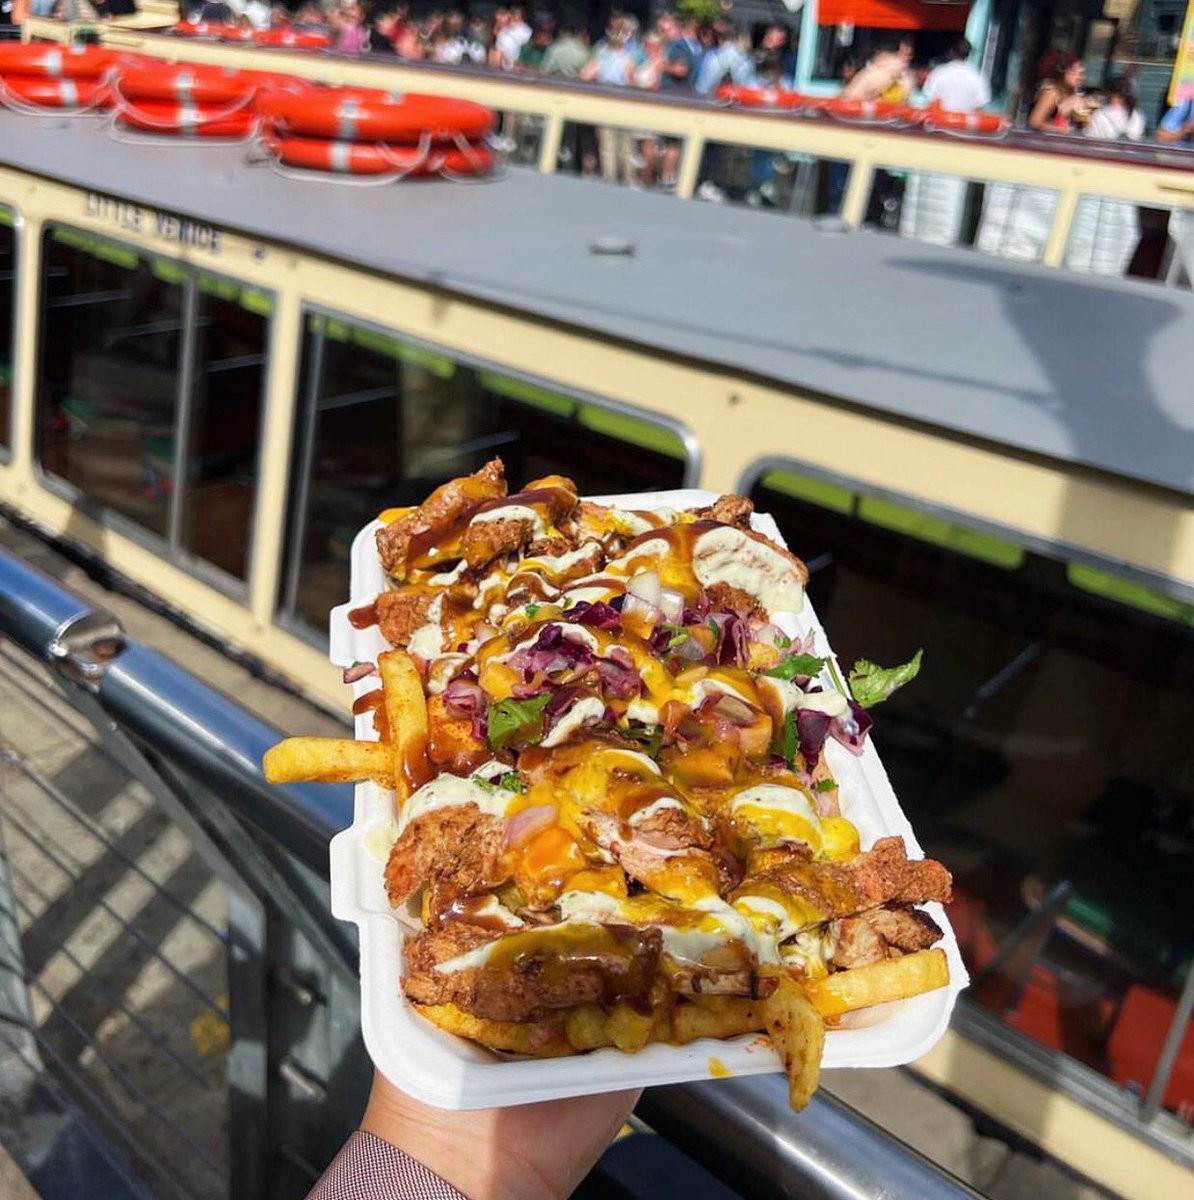 We reckon it’s a ‘loaded fries with succulent chicken tikka by the Camden Canal’ kinda day 🌞 🇬🇧 Who’s with us? Not letting go of these summer days any time soon… @CamdenMarket #sundayvibes #foodie